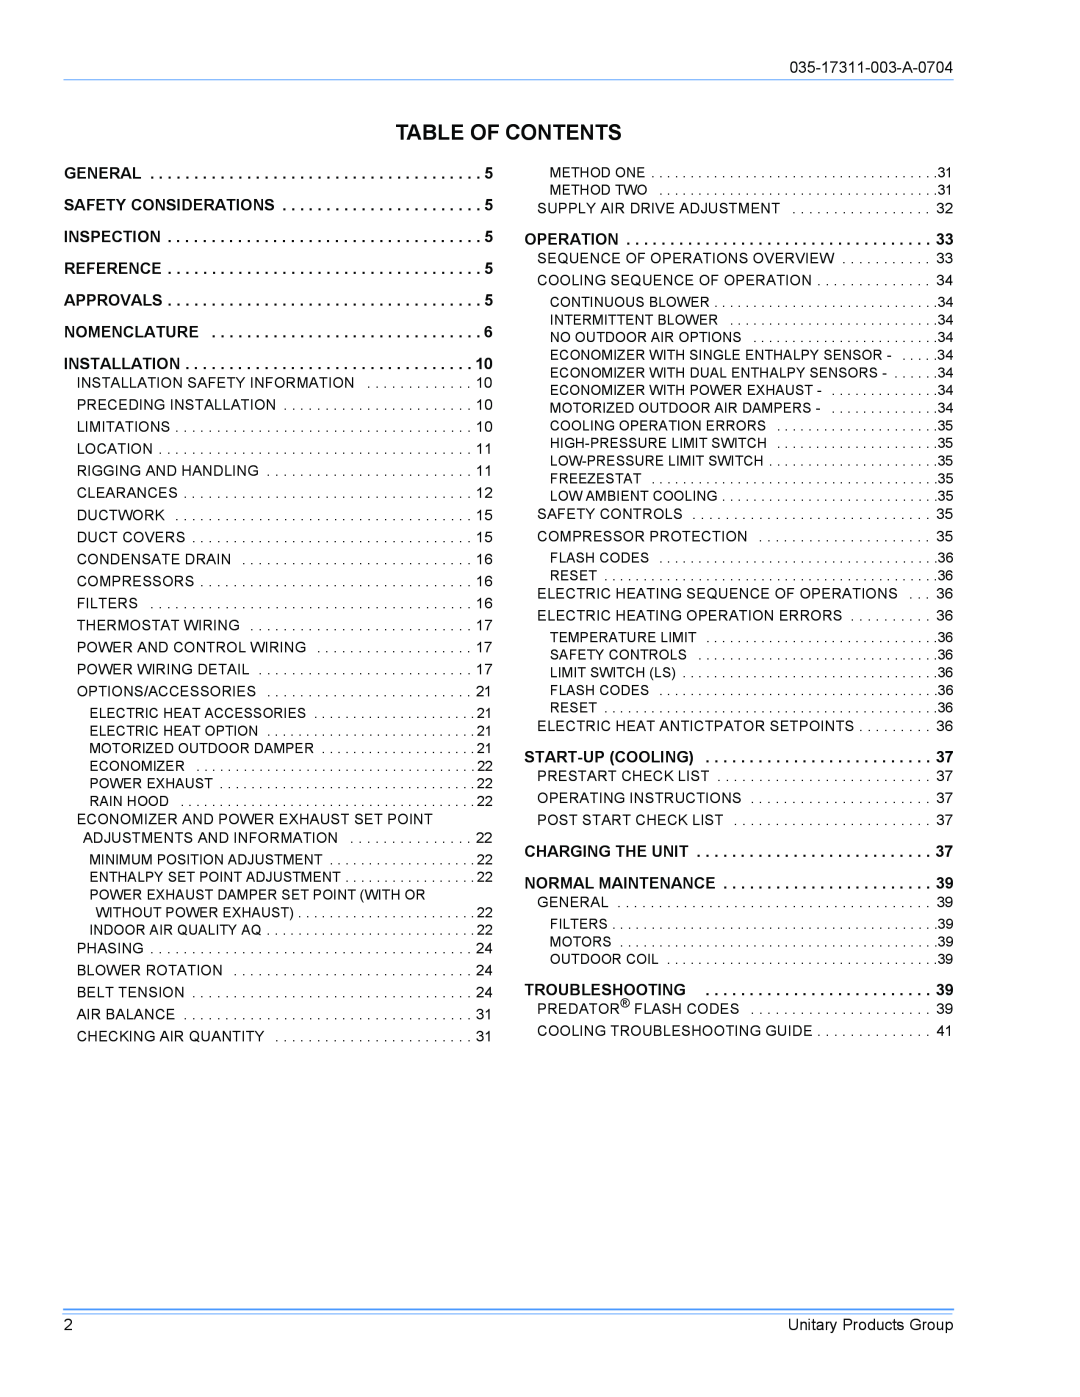 York DM090 installation manual Table Of Contents, 035-17311-003-A-0704 